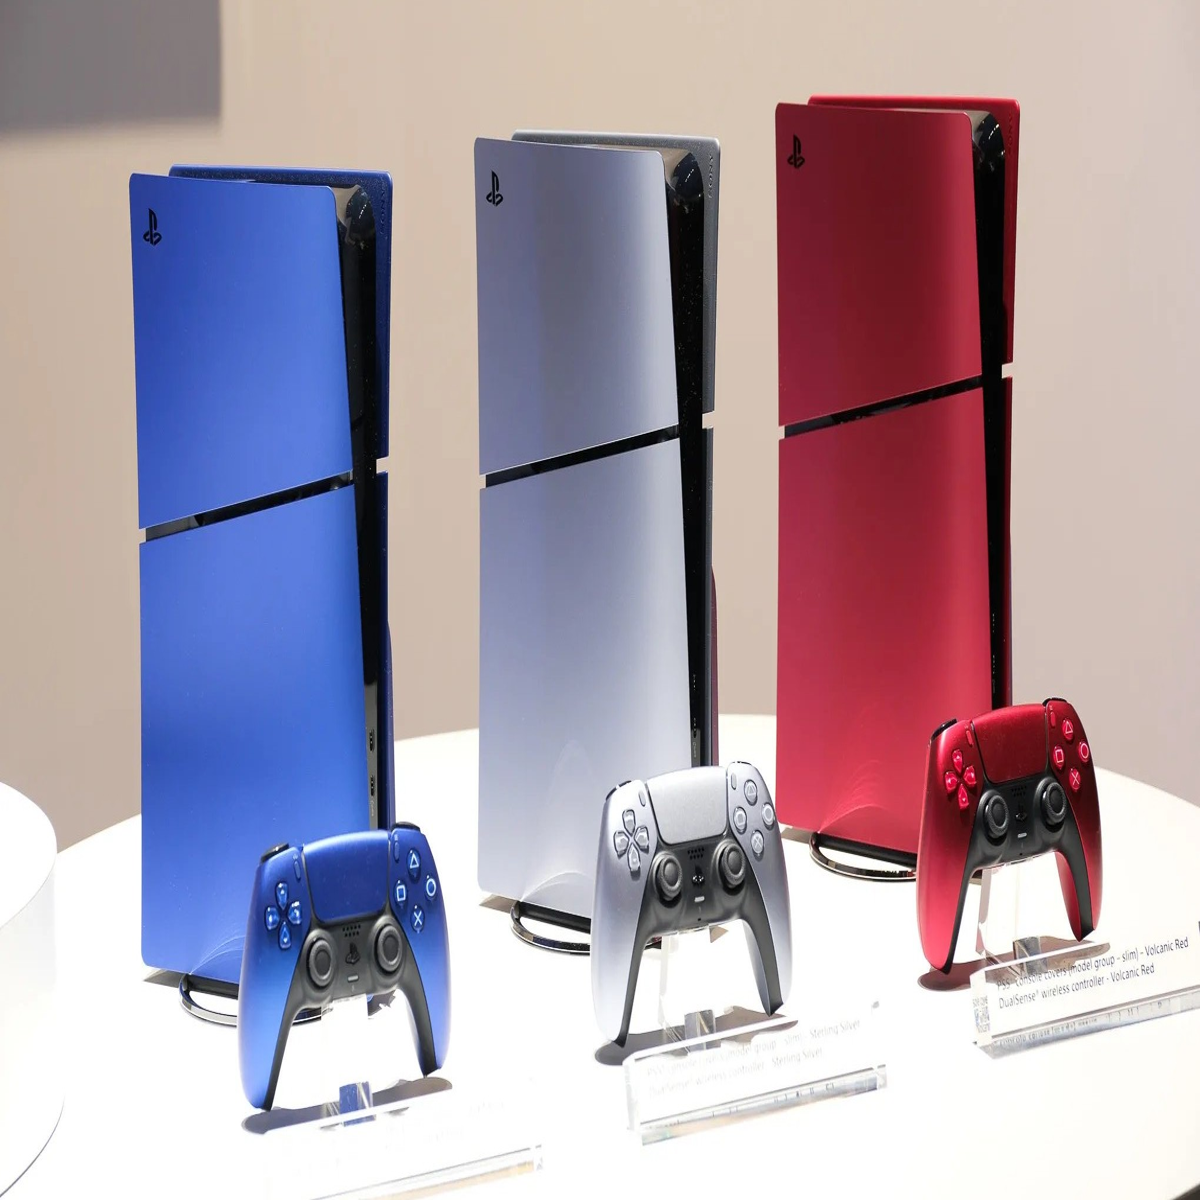 Sony shows off upcoming PS5 Slim console covers